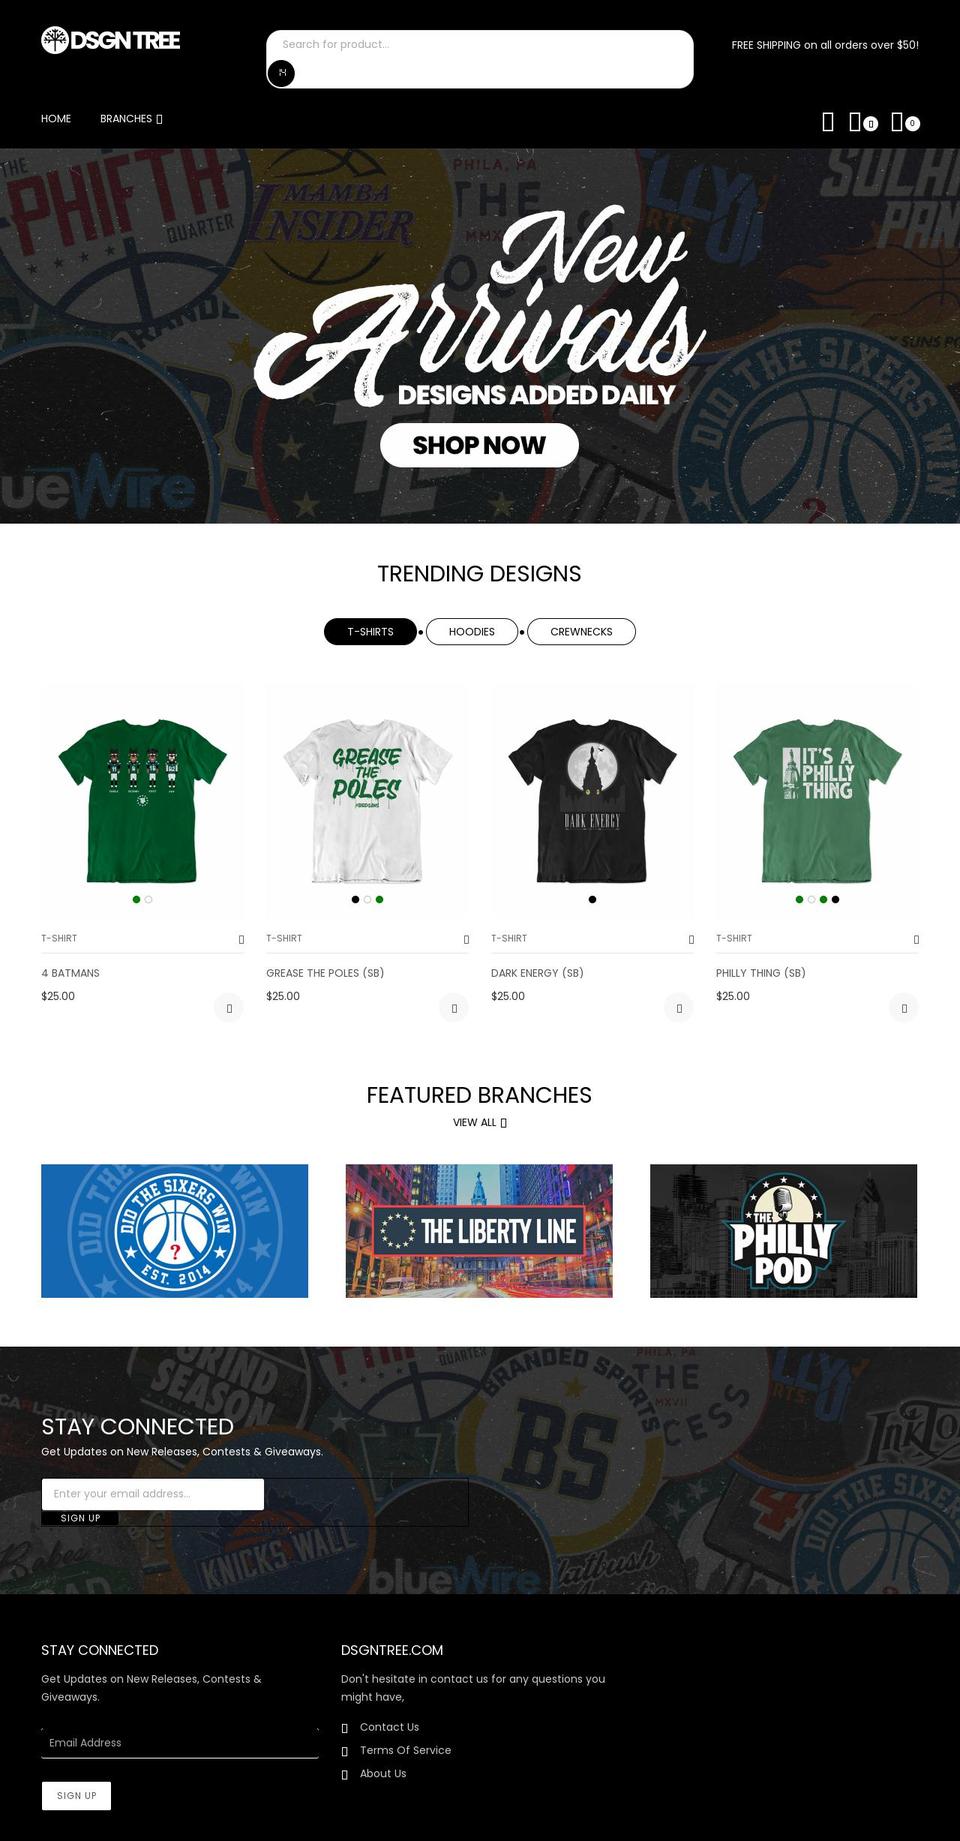 Bw store Shopify theme site example dsgntree.com